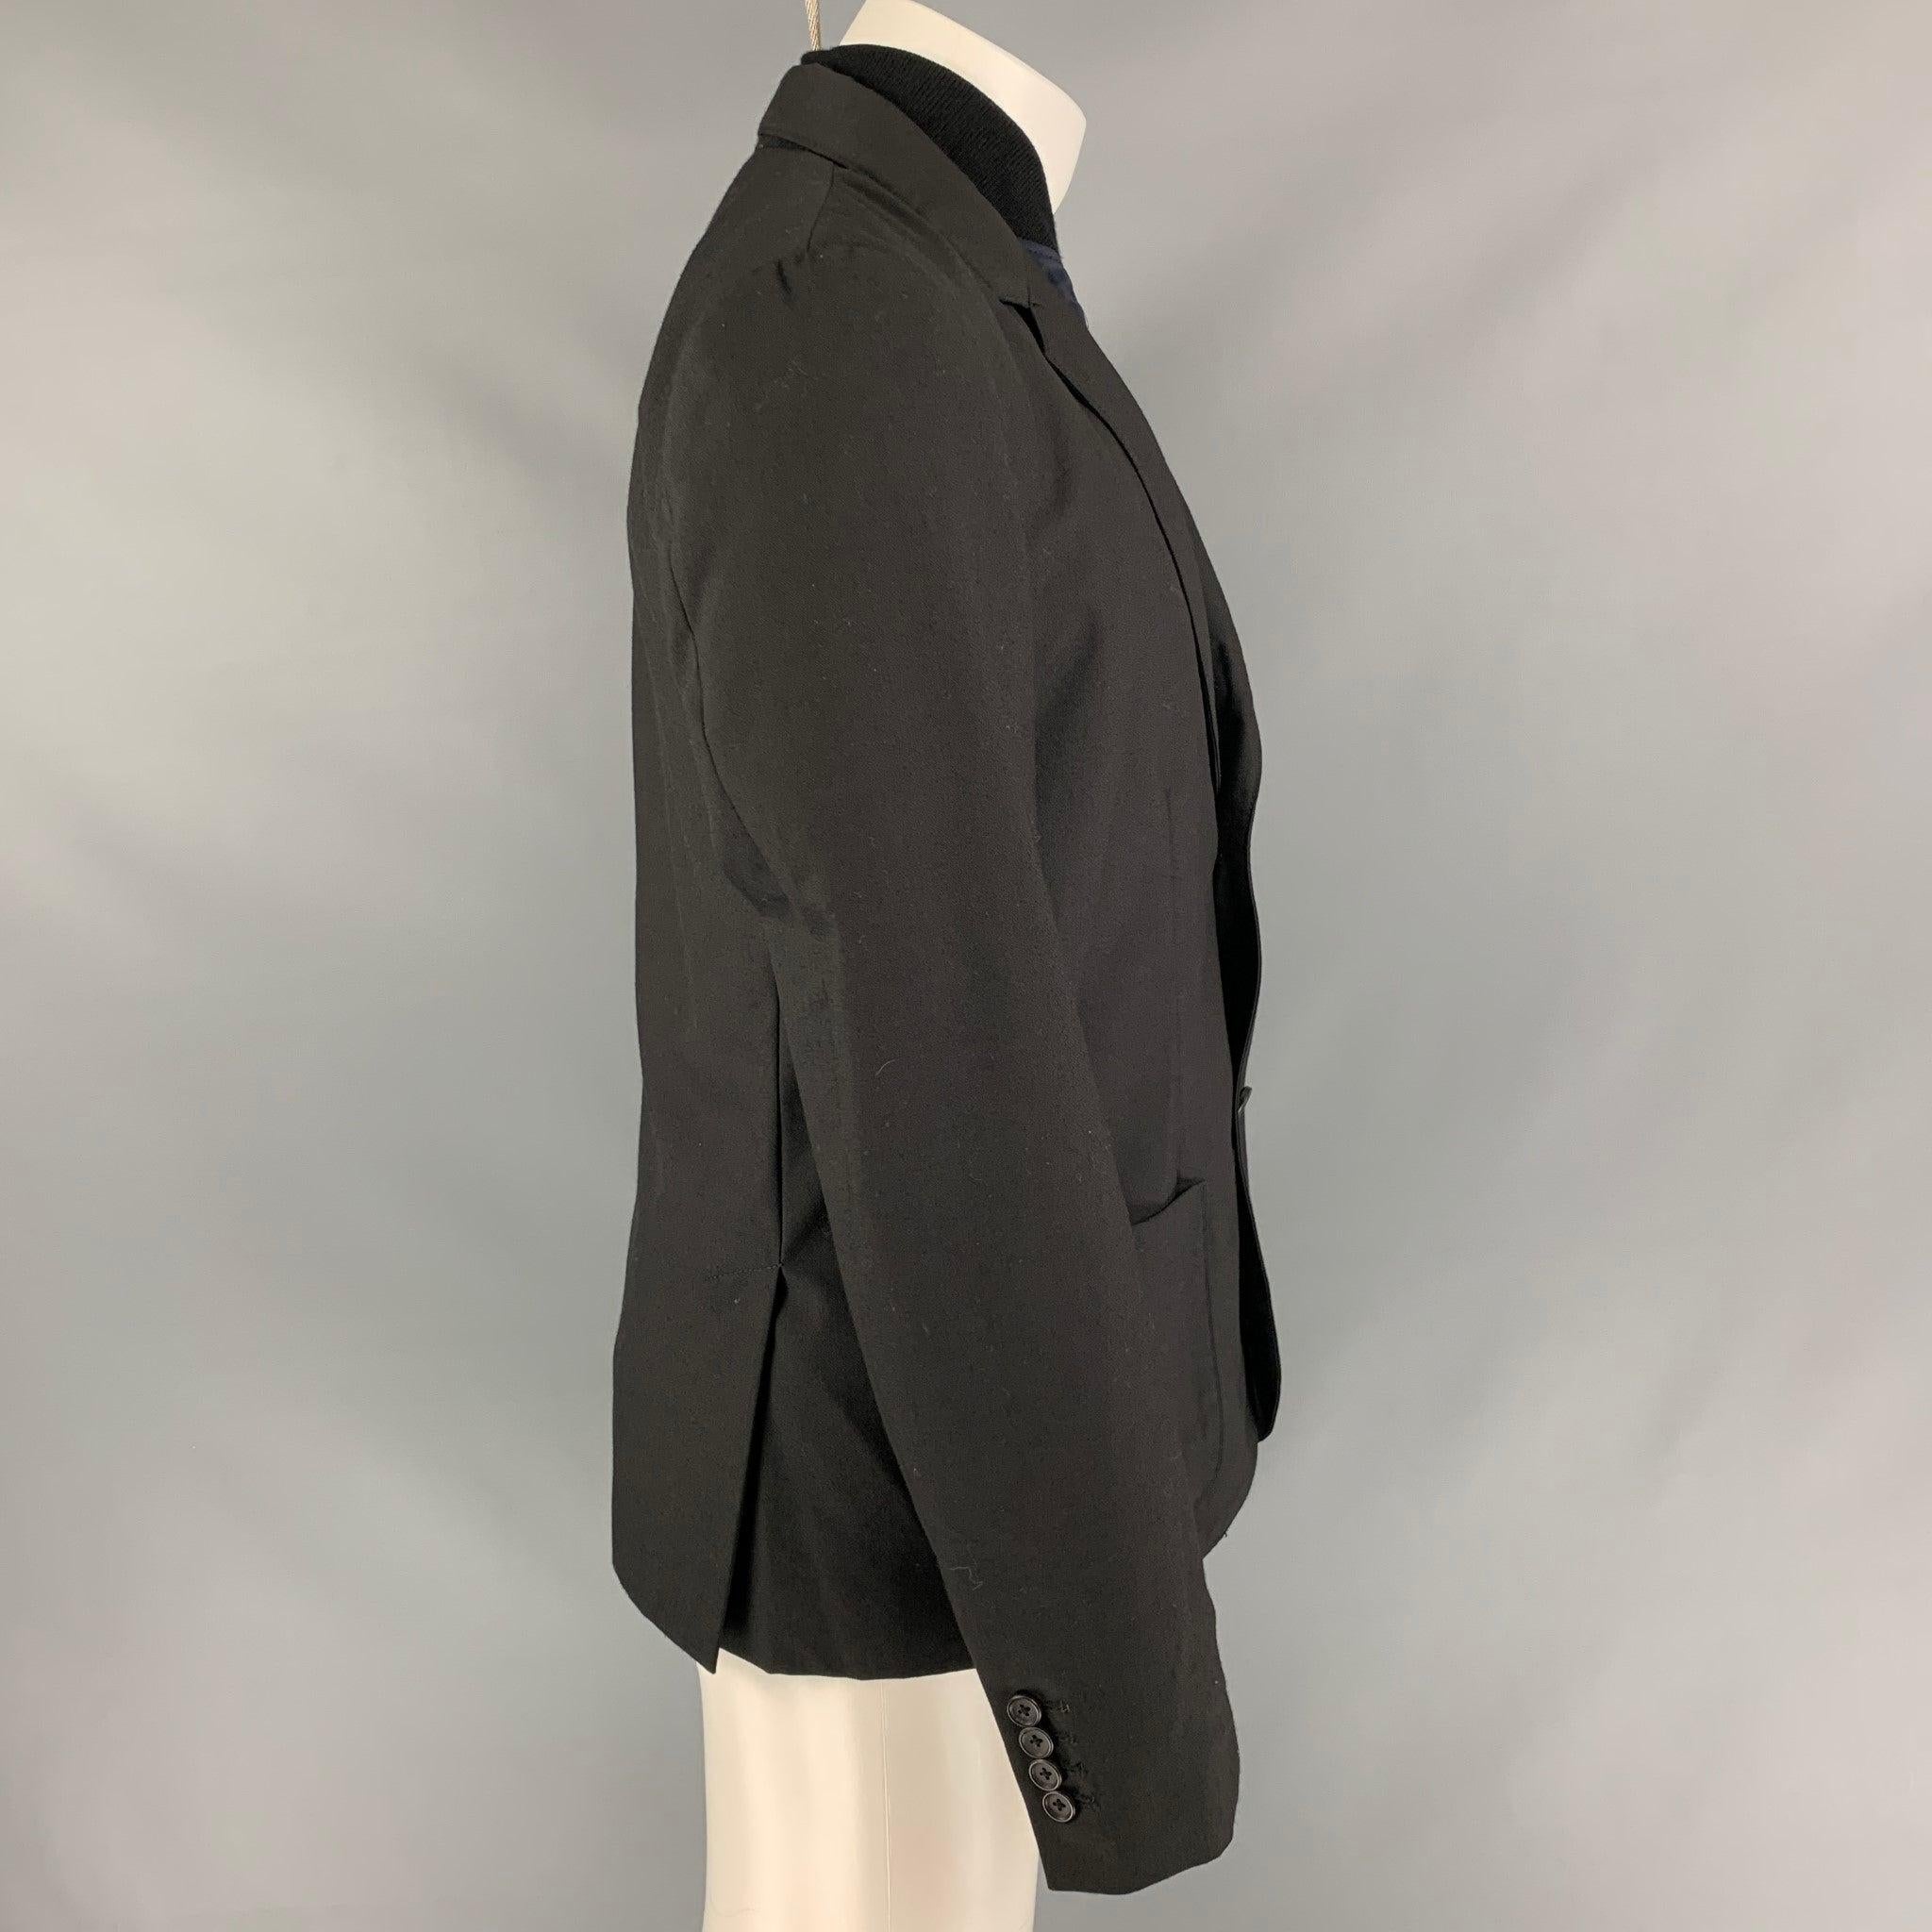 MARC by MARC JACOBS Size L Black & Navy Polyester Blend Jacket In Good Condition For Sale In San Francisco, CA